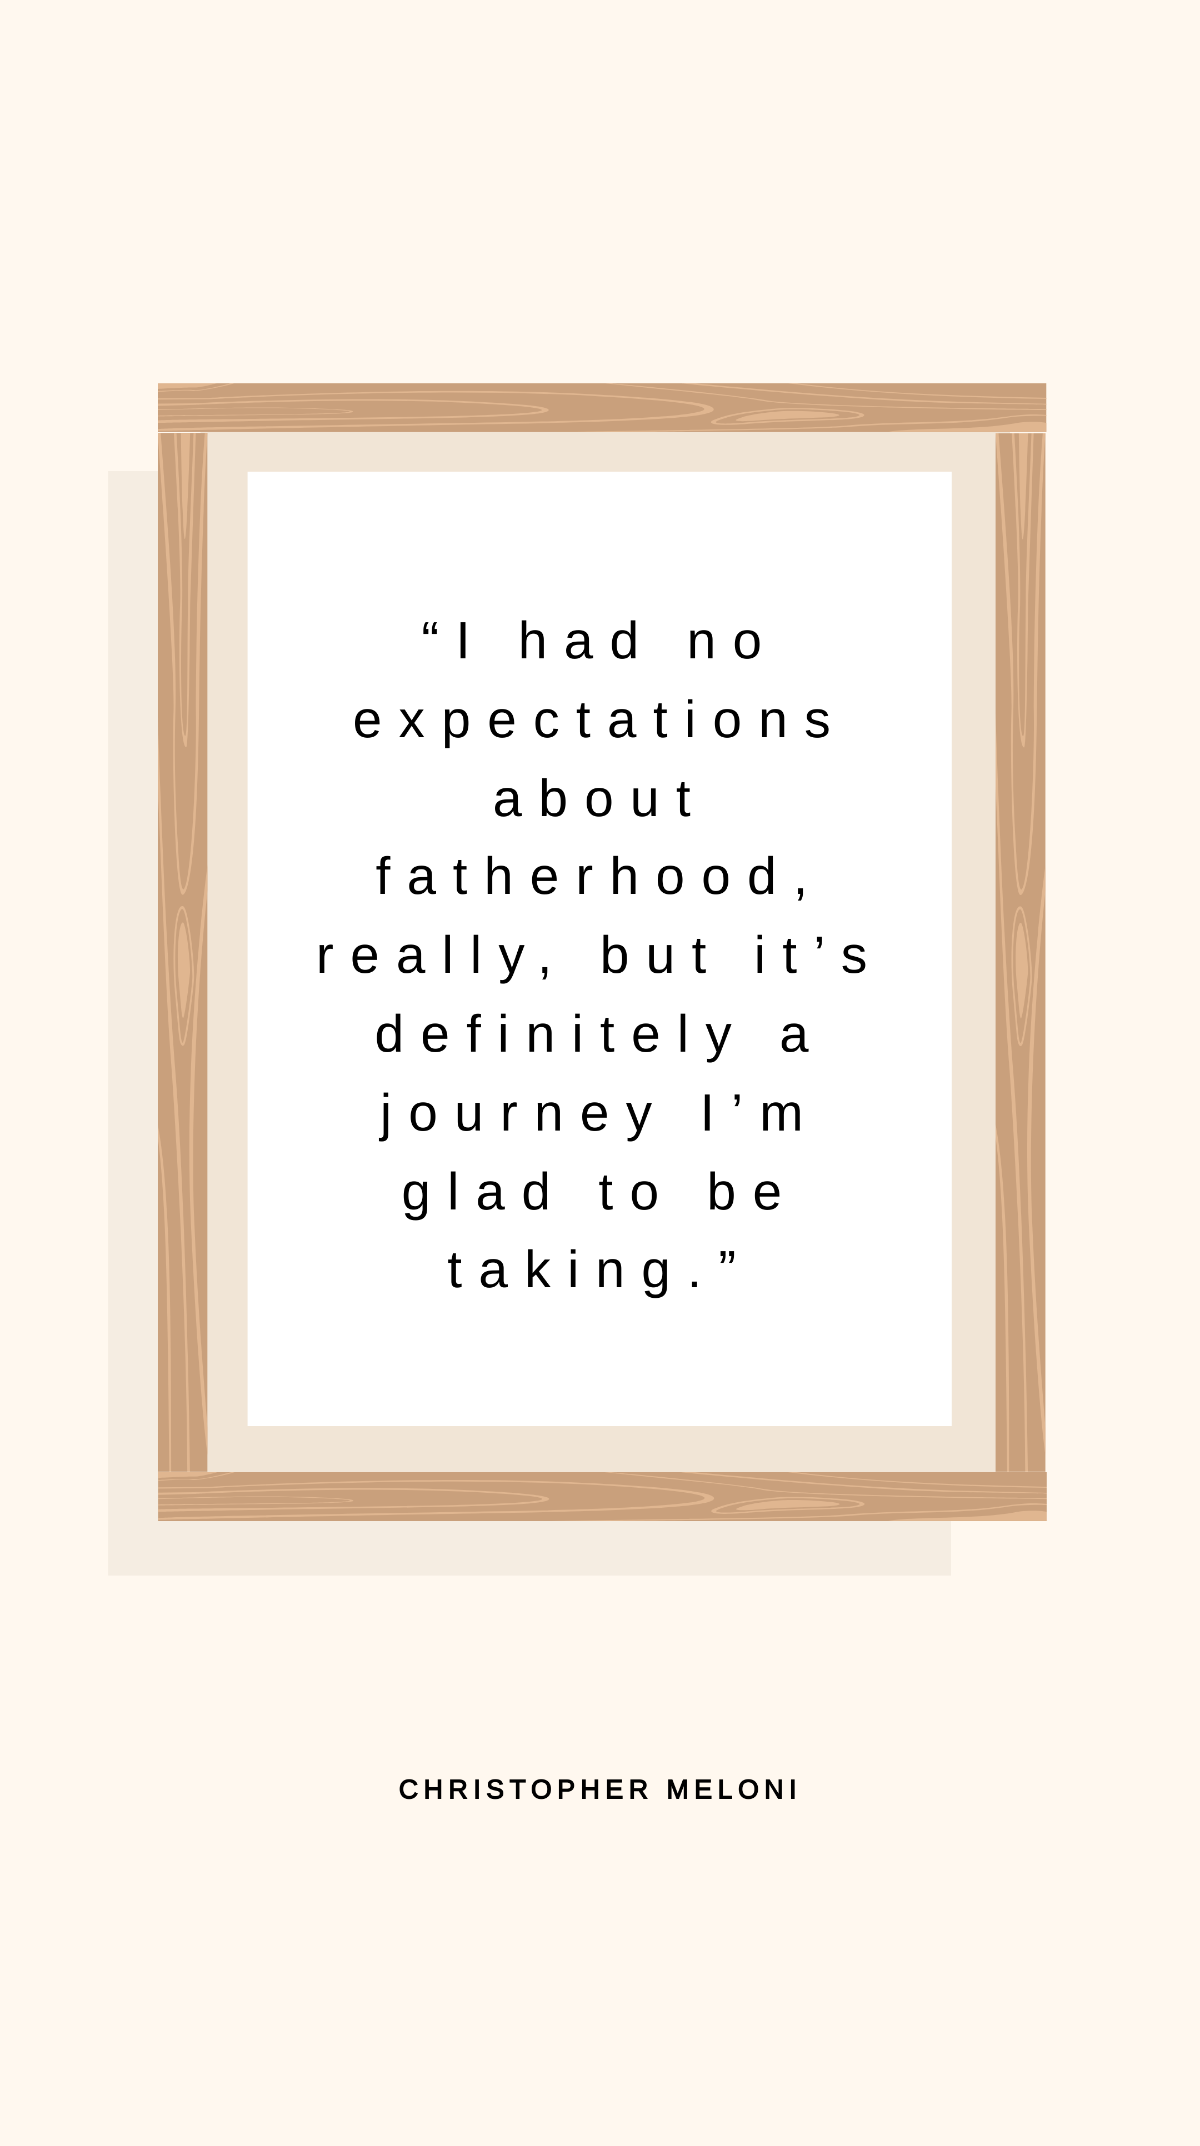 Christopher Meloni - “I had no expectations about fatherhood, really, but it’s definitely a journey I’m glad to be taking.” Template